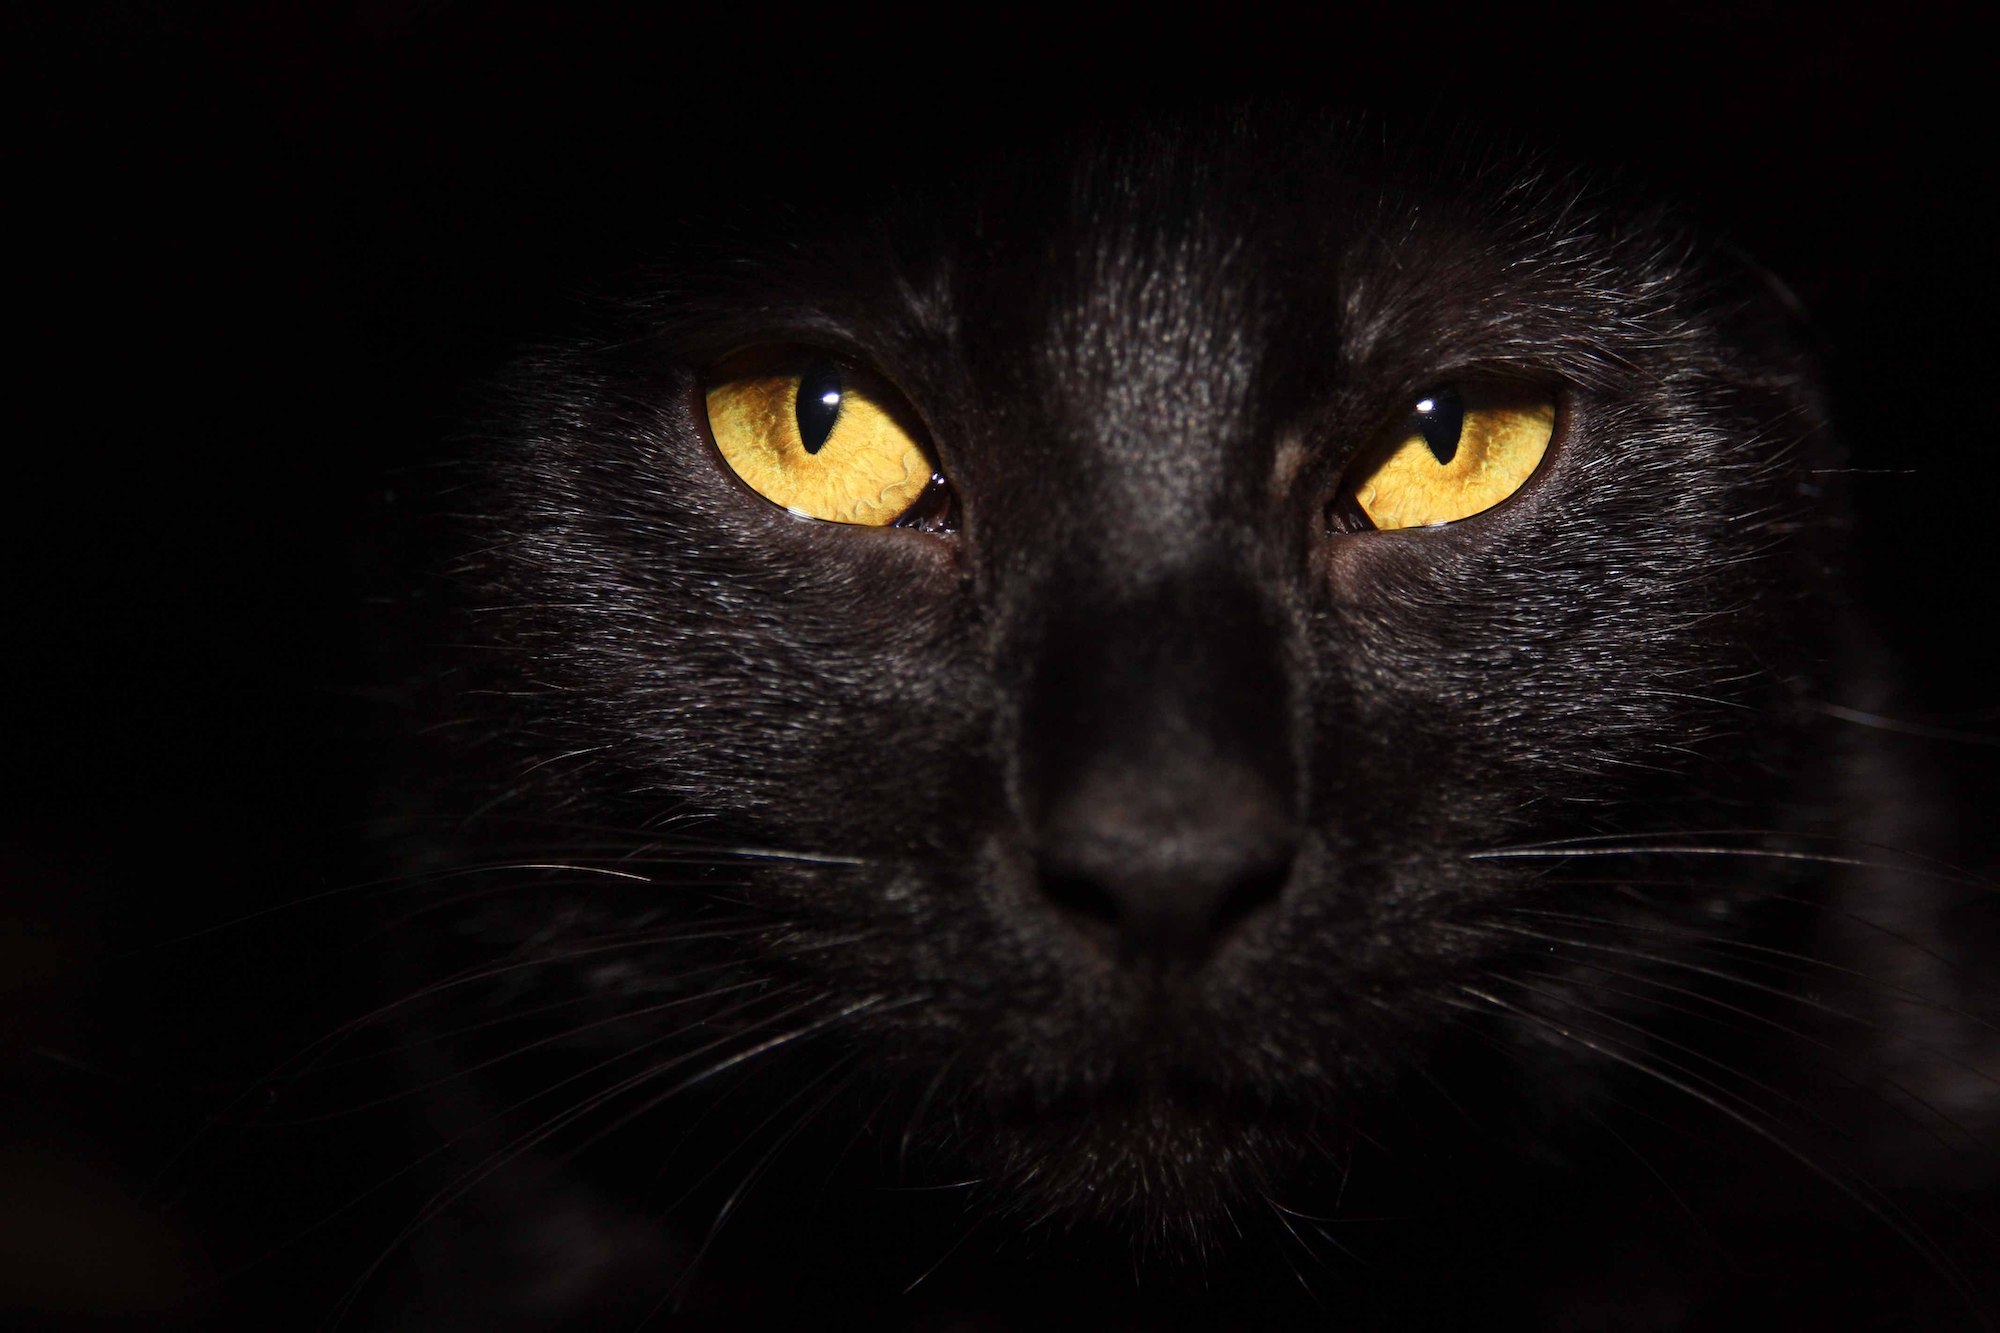 Close-up photo of a black cat with golden eyes looking into the camera.